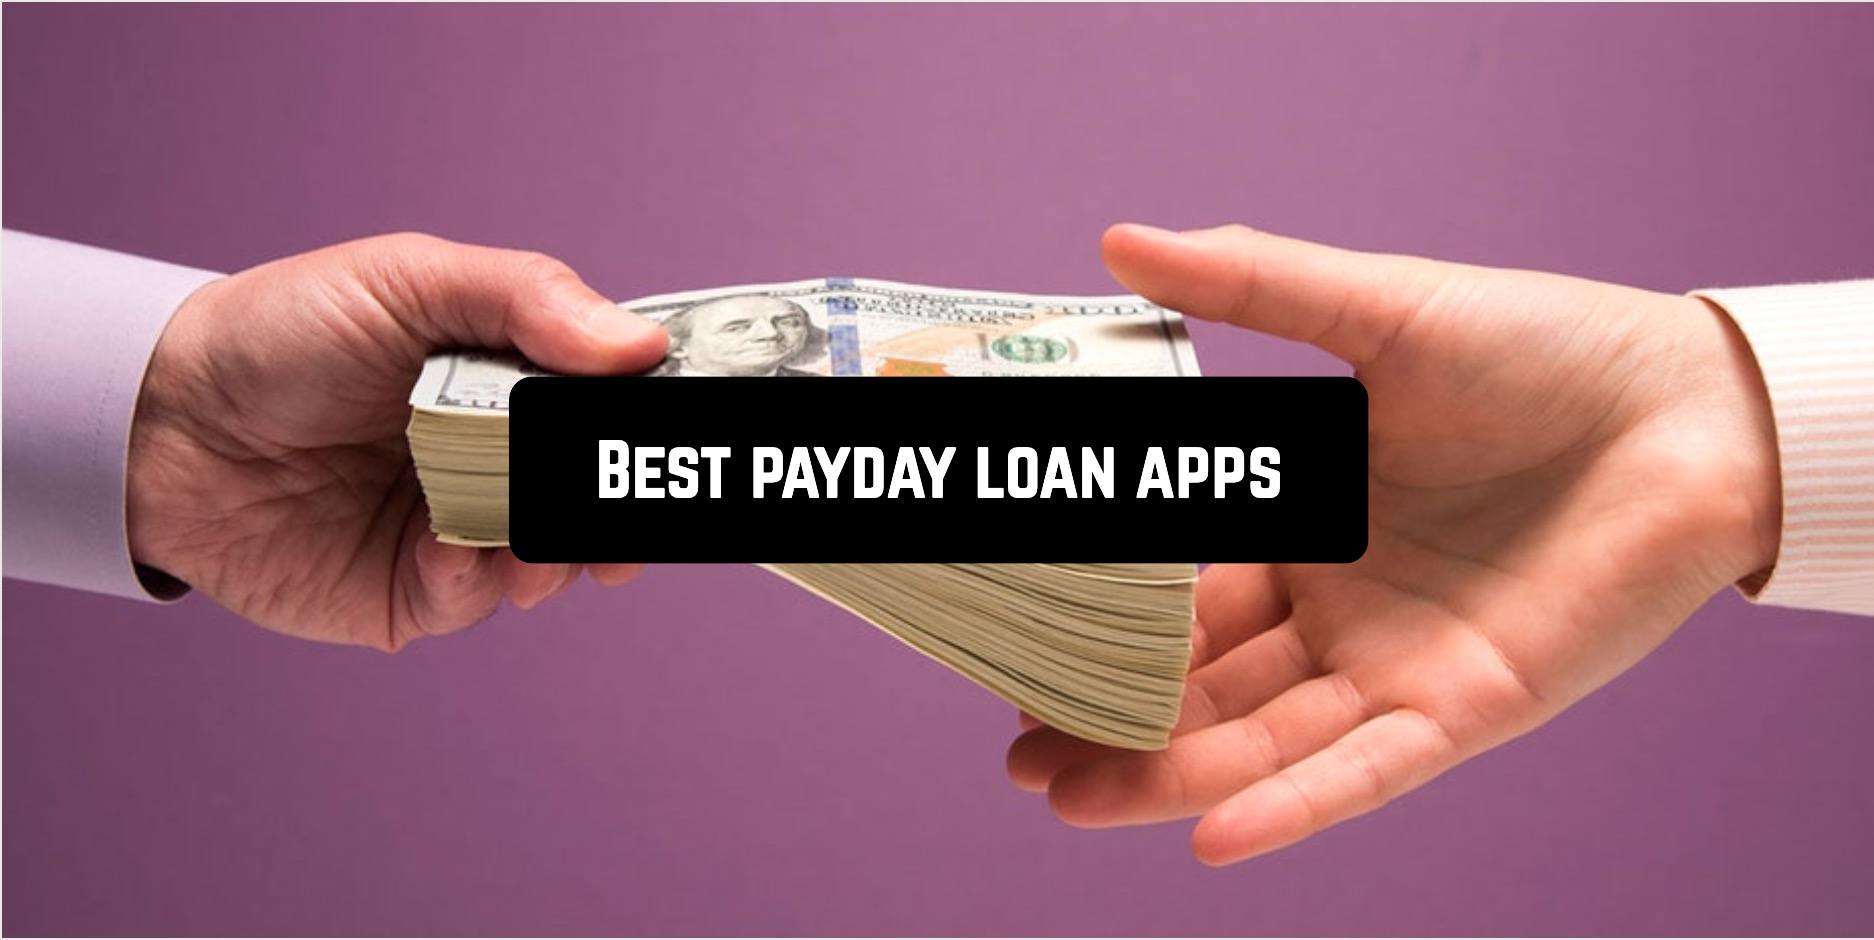 Best payday loan apps